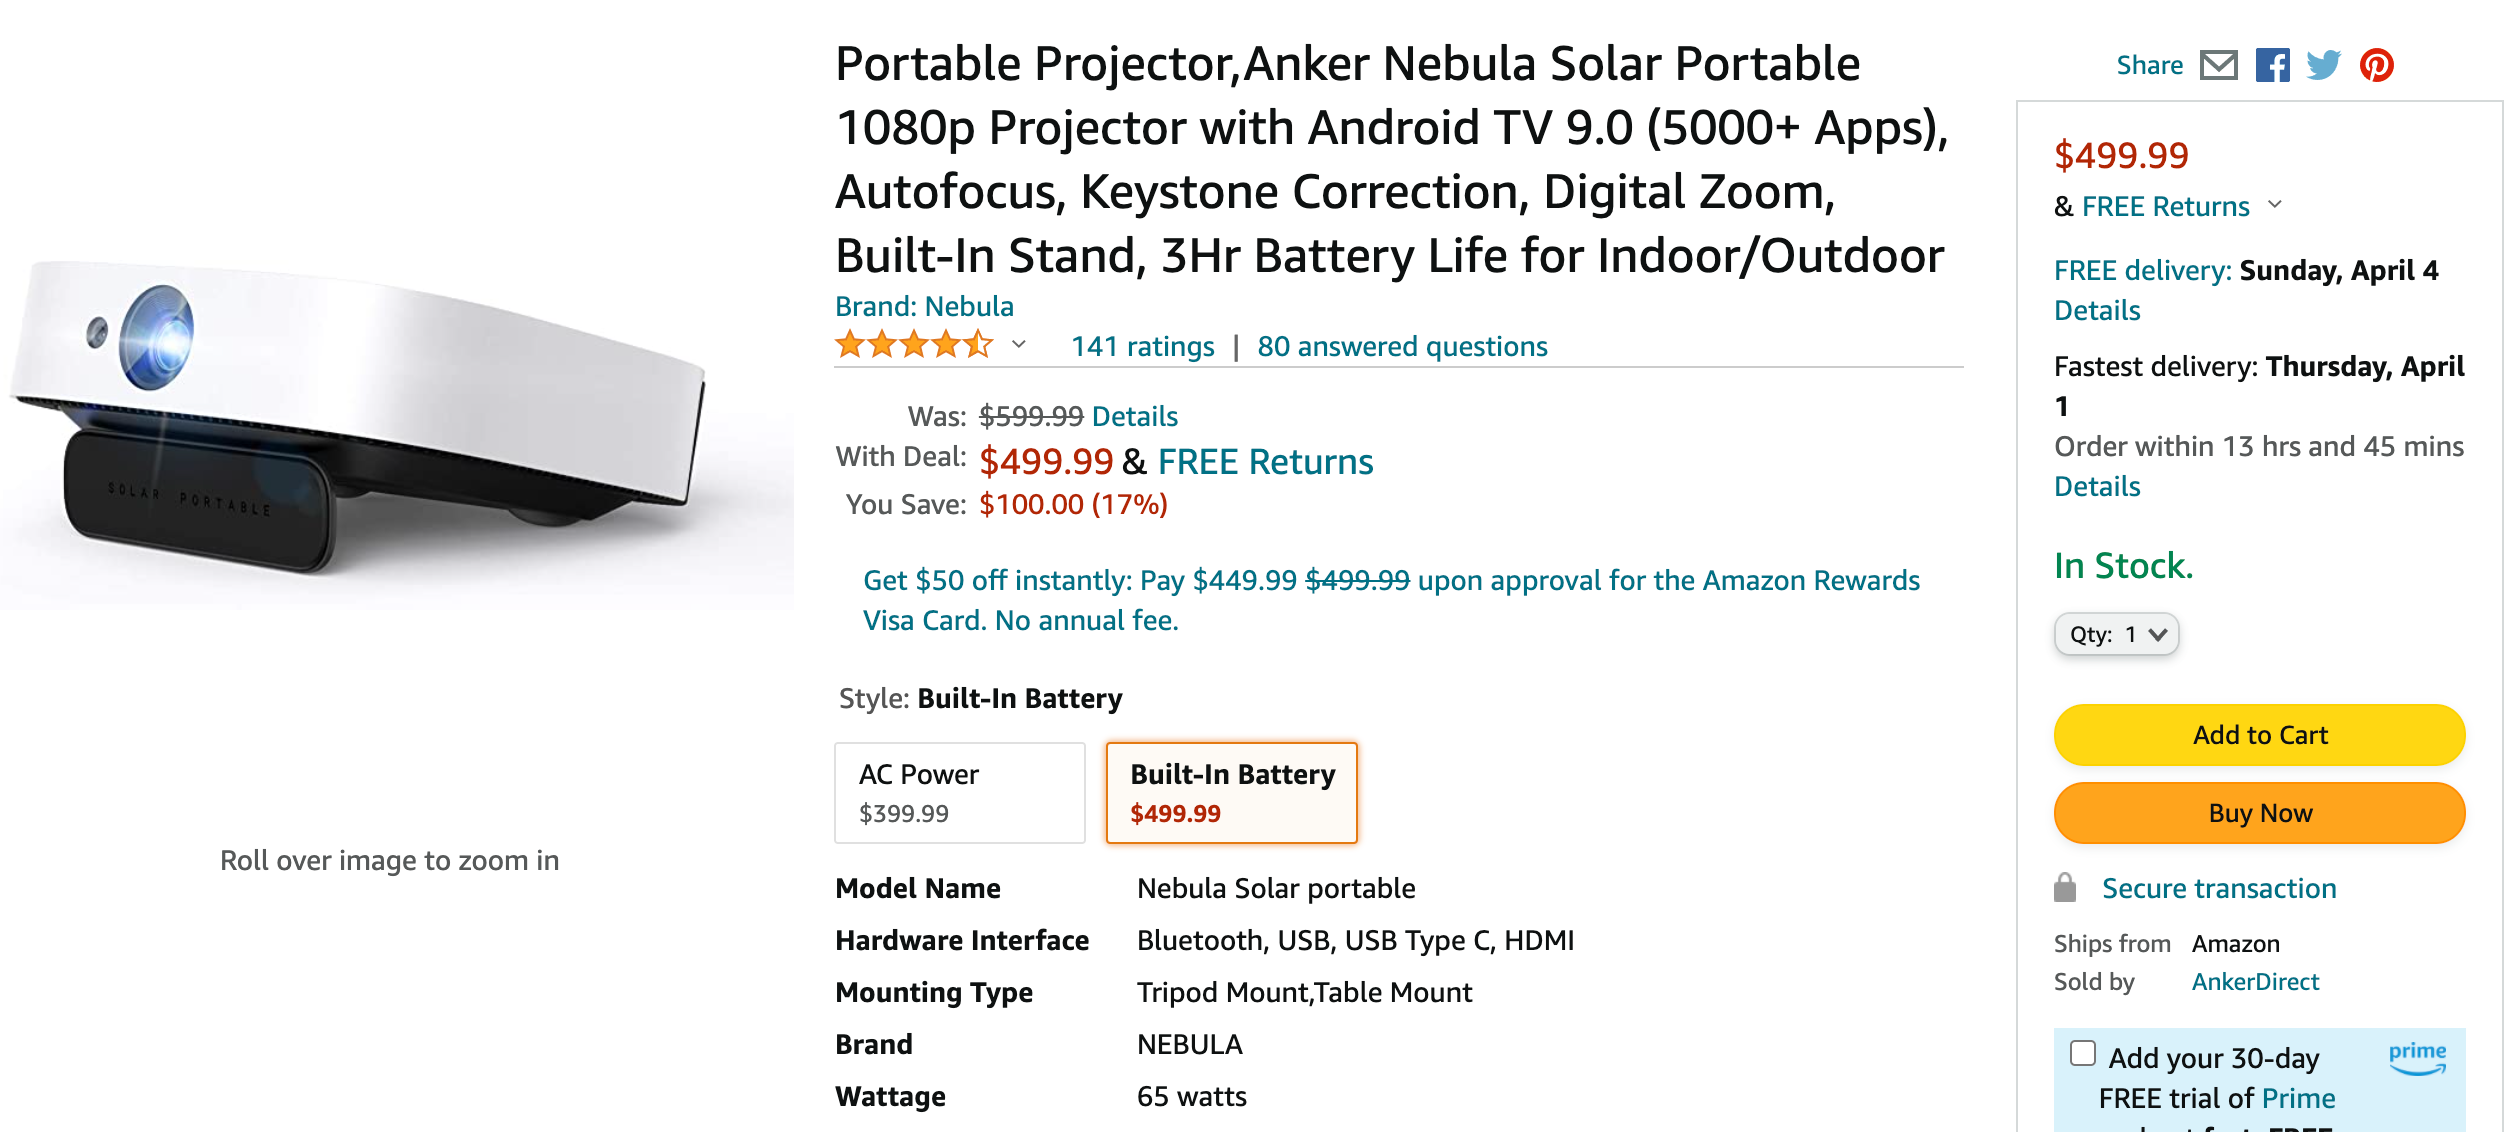 Anker Nebula Solar Portable projector review